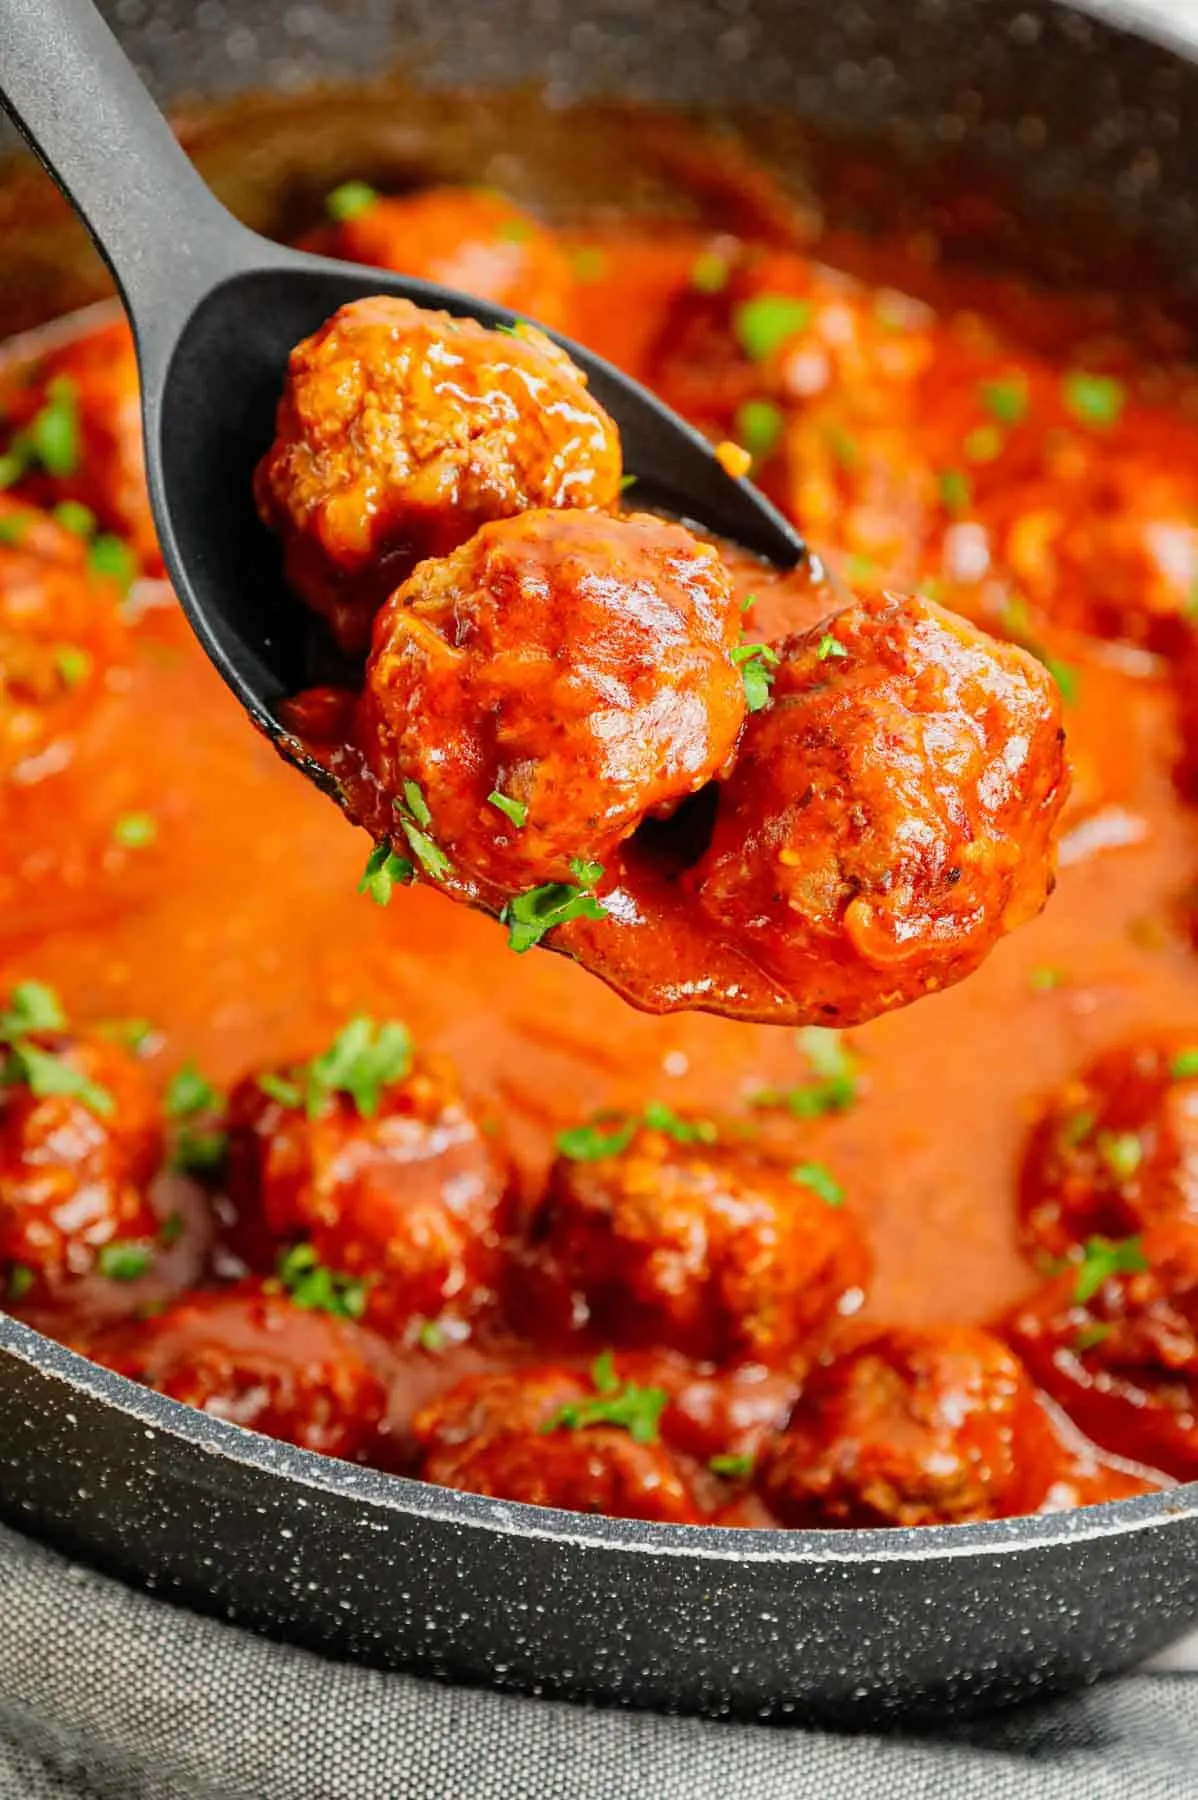 Porcupine Meatballs are delicious meatballs made with ground beef, Minute rice and diced onions all in a flavourful sauce made with condensed tomato soup, Worcestershire sauce and Italian seasoning.